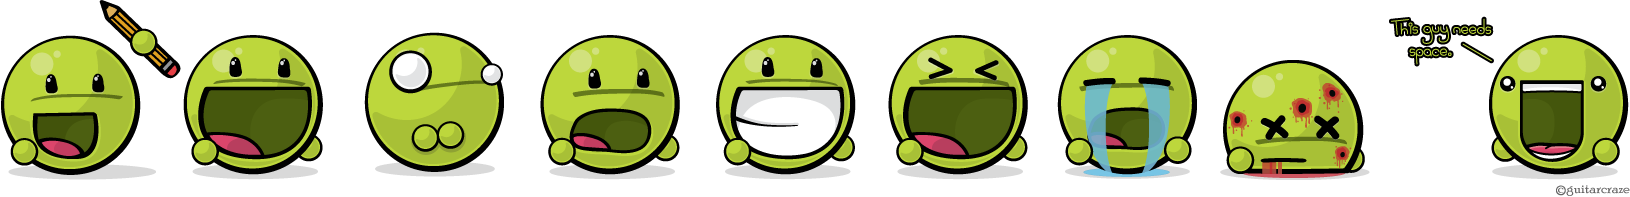 Giant Green Vector Emote Pack